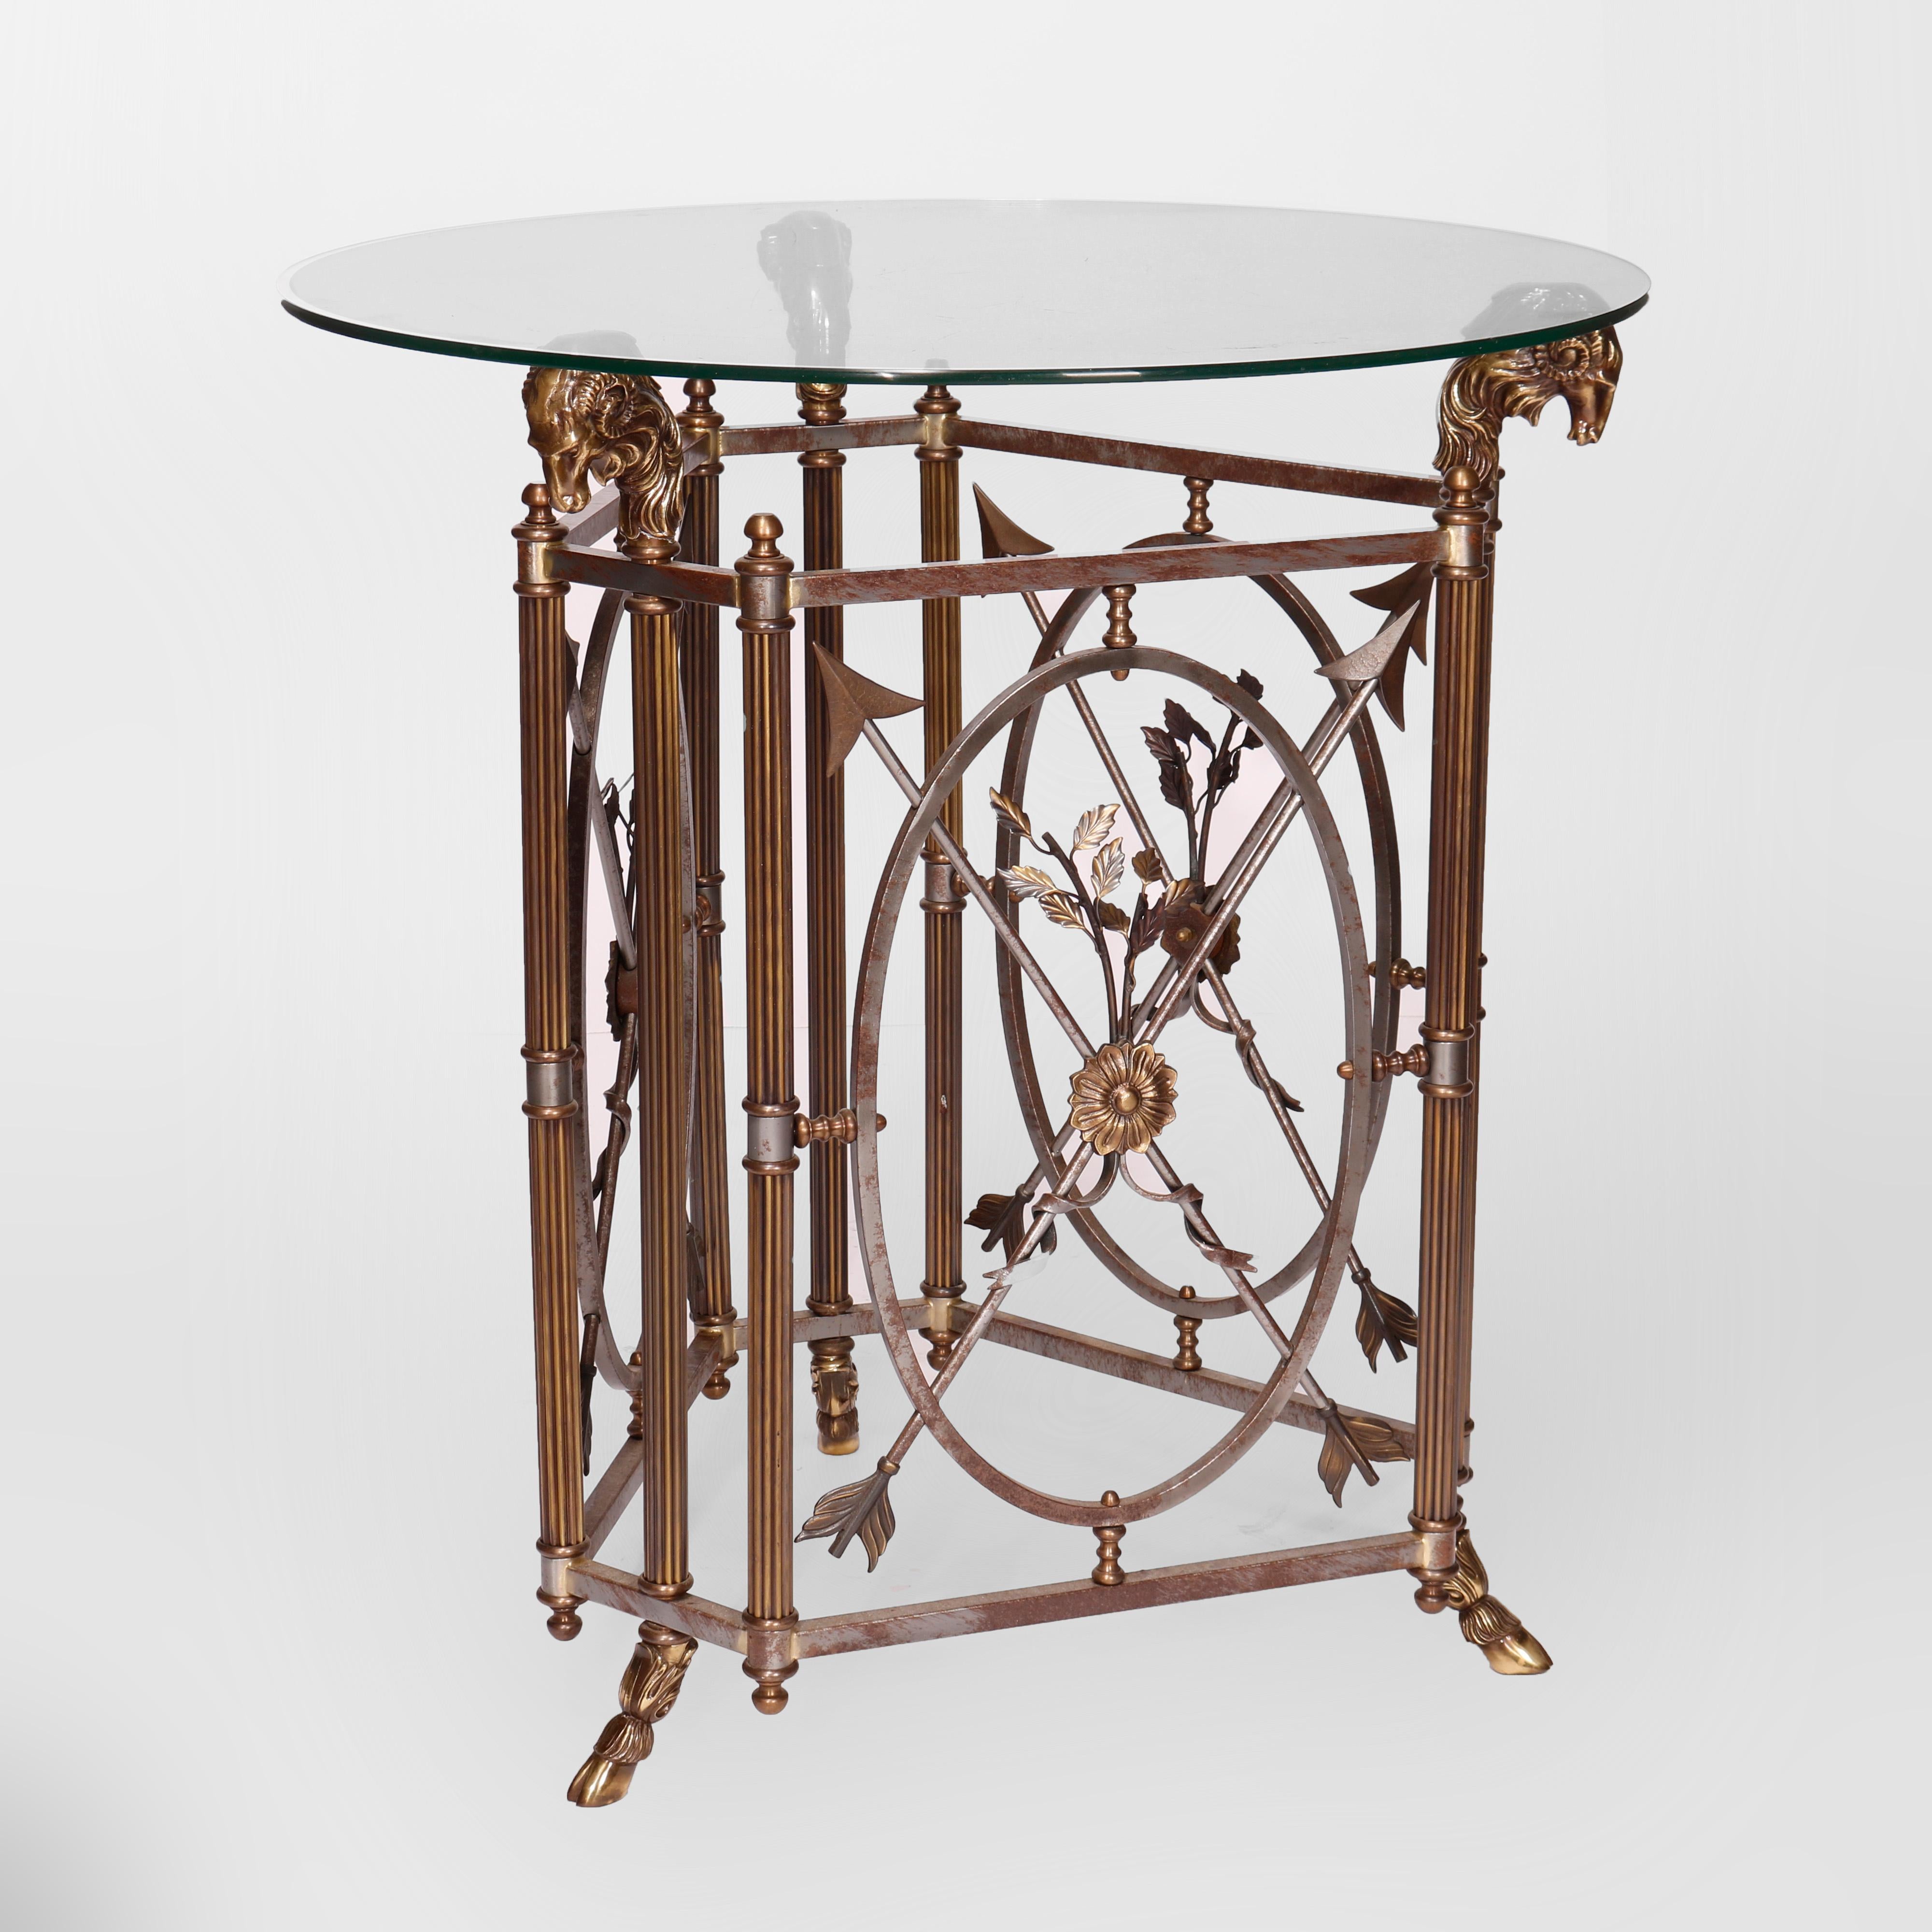 A French Empire figural center table offers glass top over cast and bronzed base in triangular form having reeded legs with rams head capitals and hoof feet, stretchers with crossed arrows, 20th century

Measures - 38.5''H X 36''W X 36''D; stand